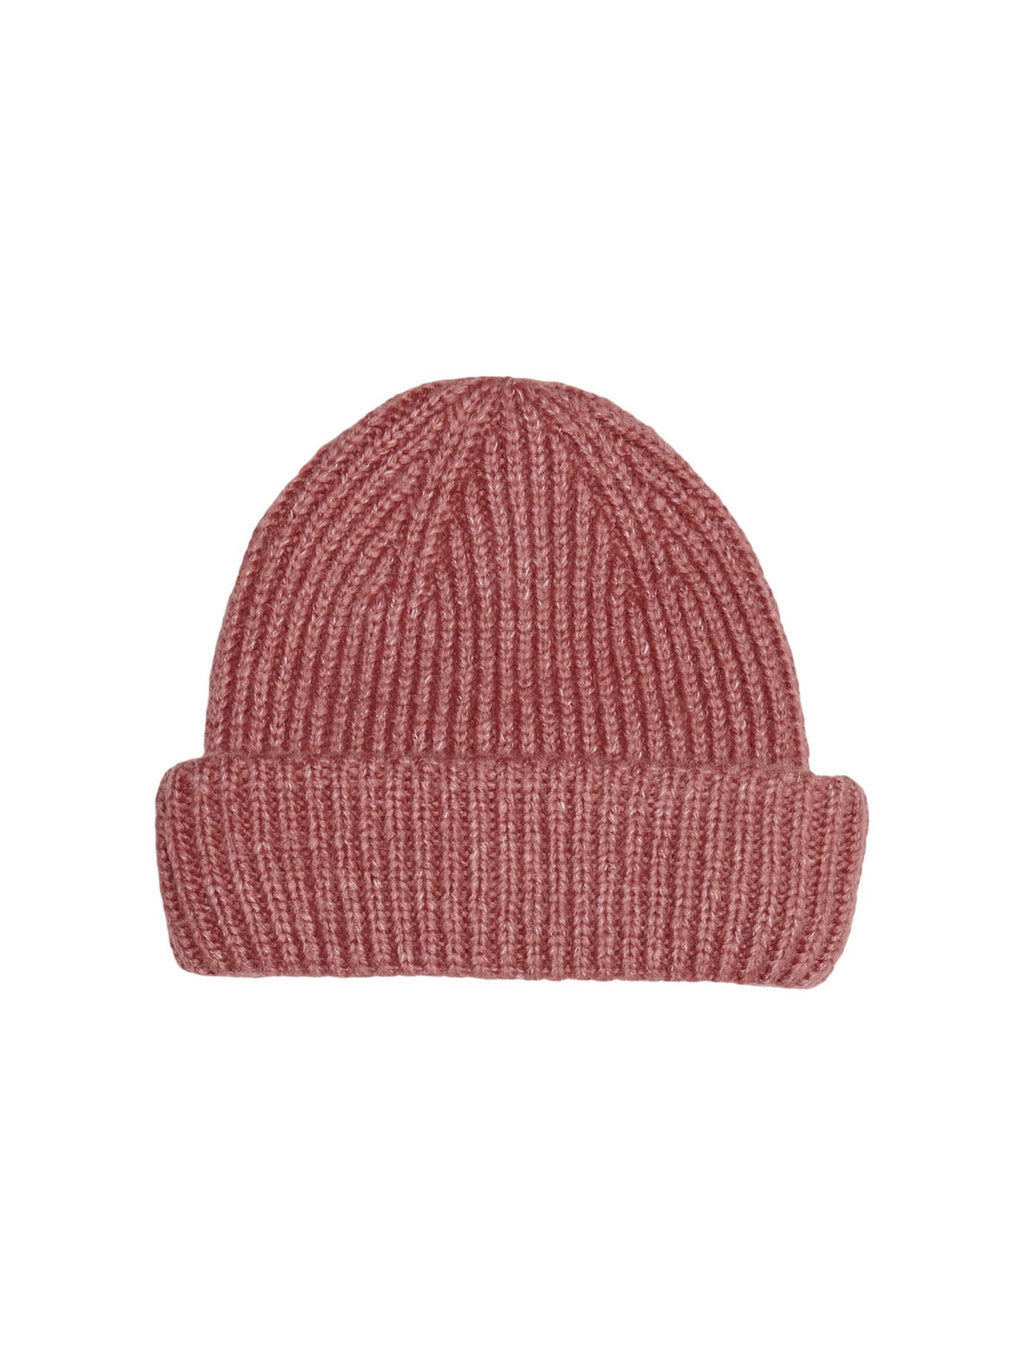 Sussy Life Knit Beanie - Canyon Rose